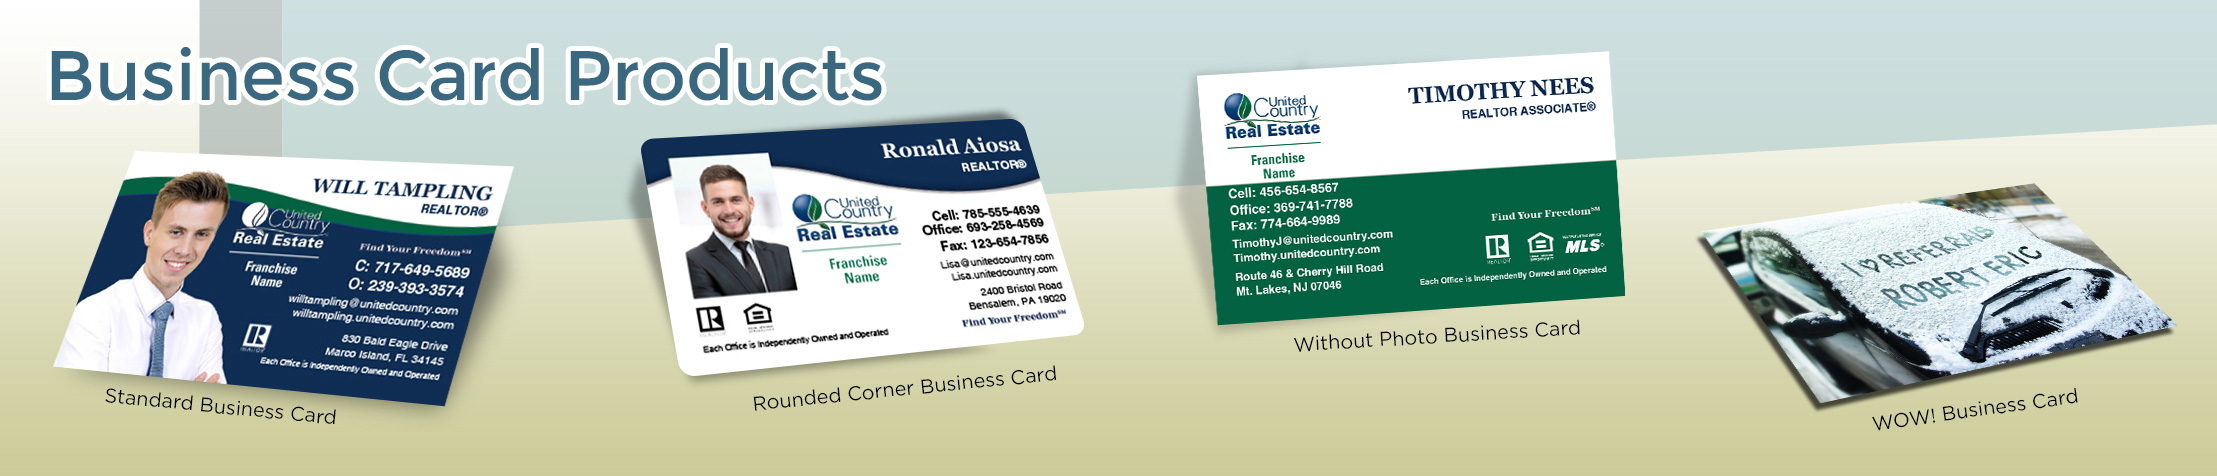 United Country Real Estate Business Card Products - United Country Real Estate  - Unique, Custom Business Cards Printed on Quality Stock with Creative Designs for Realtors | BestPrintBuy.com